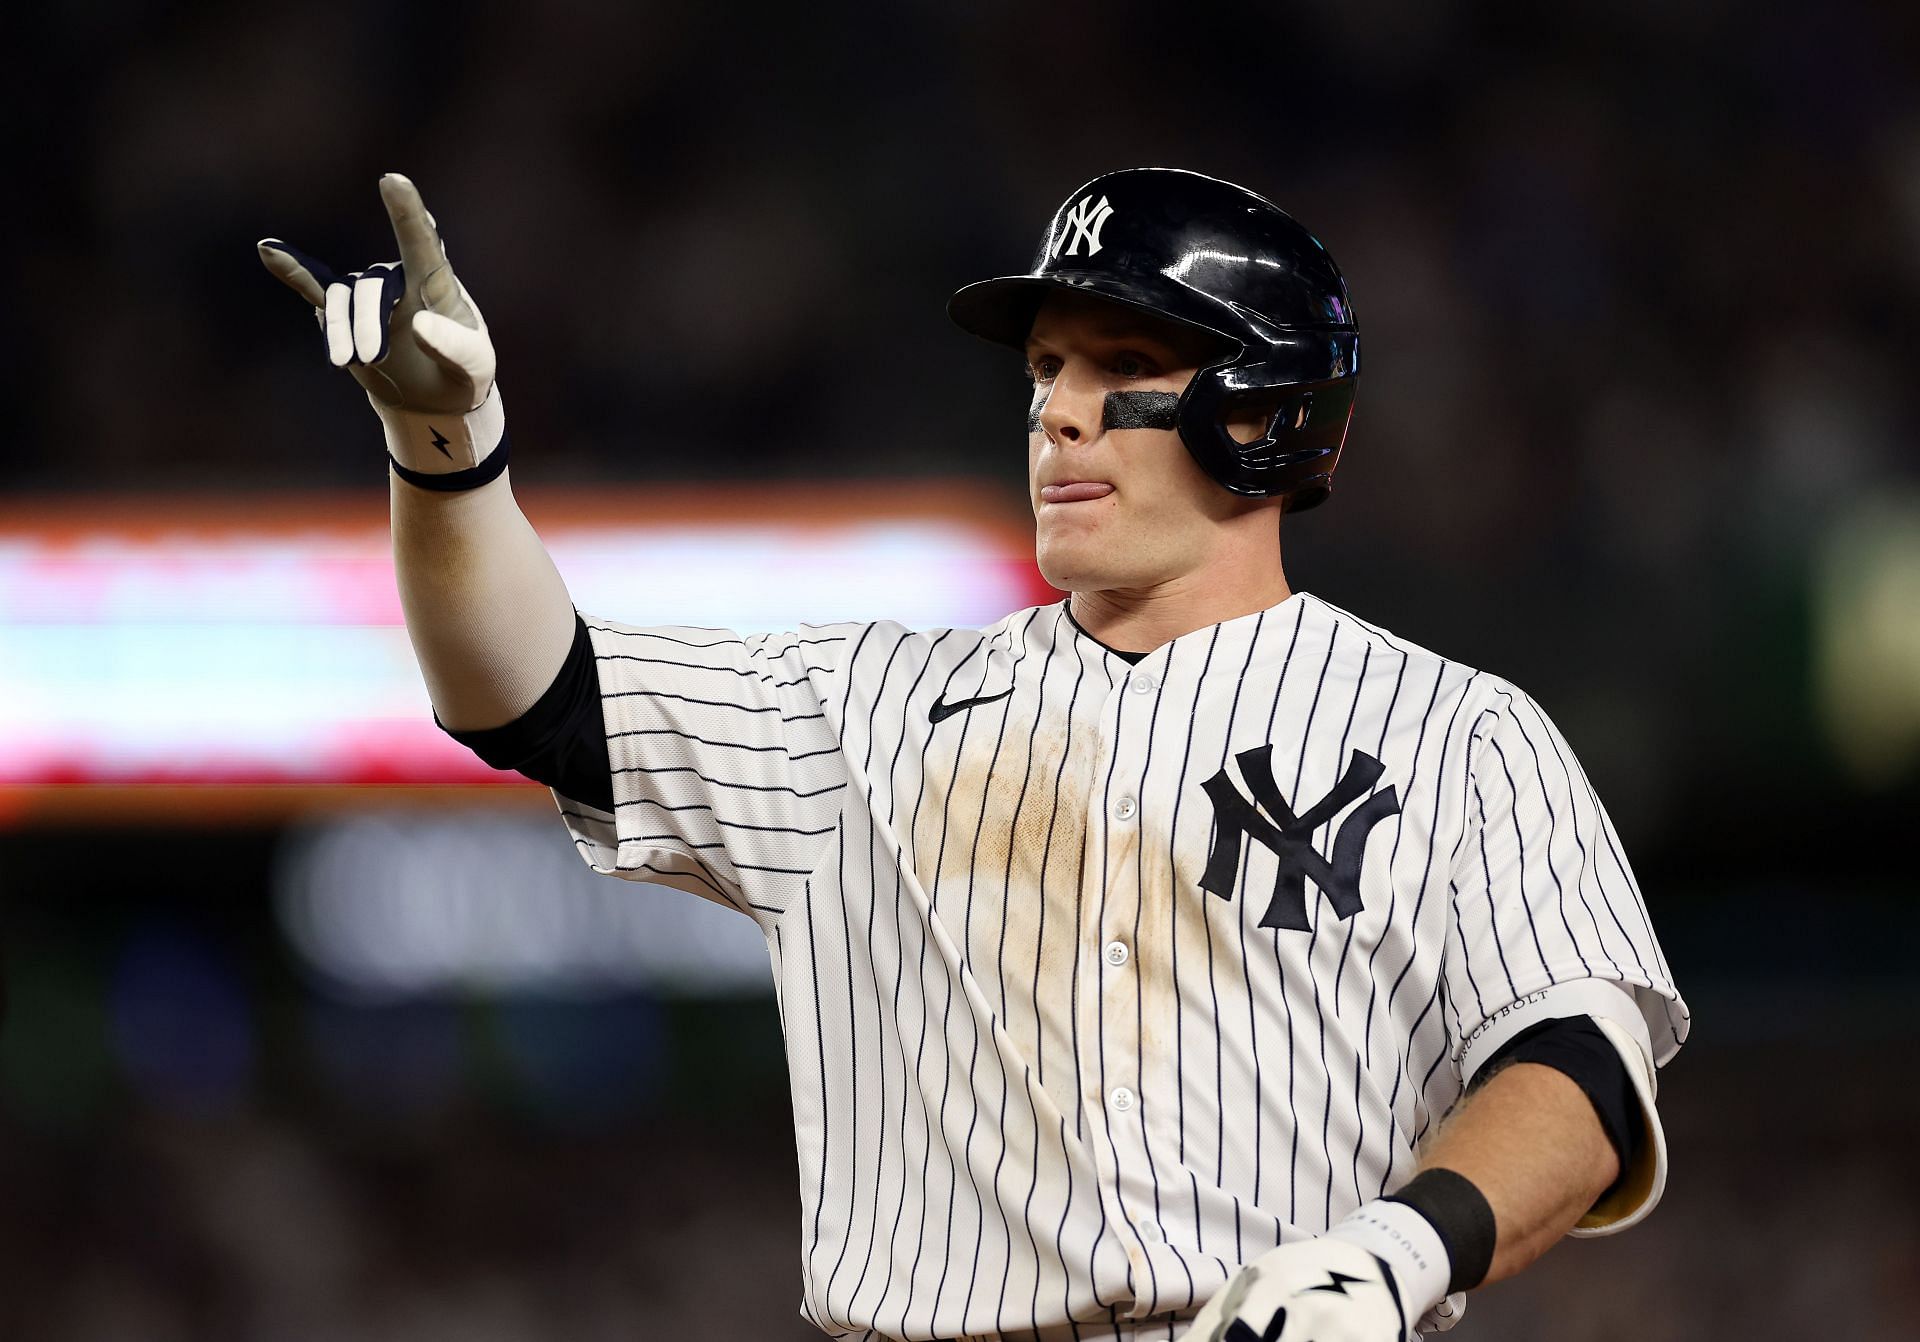 My brother is coming homeeeee” - Harrison Bader's sister shares her delight  on Instagram following the outfielder's trade to New York Yankees